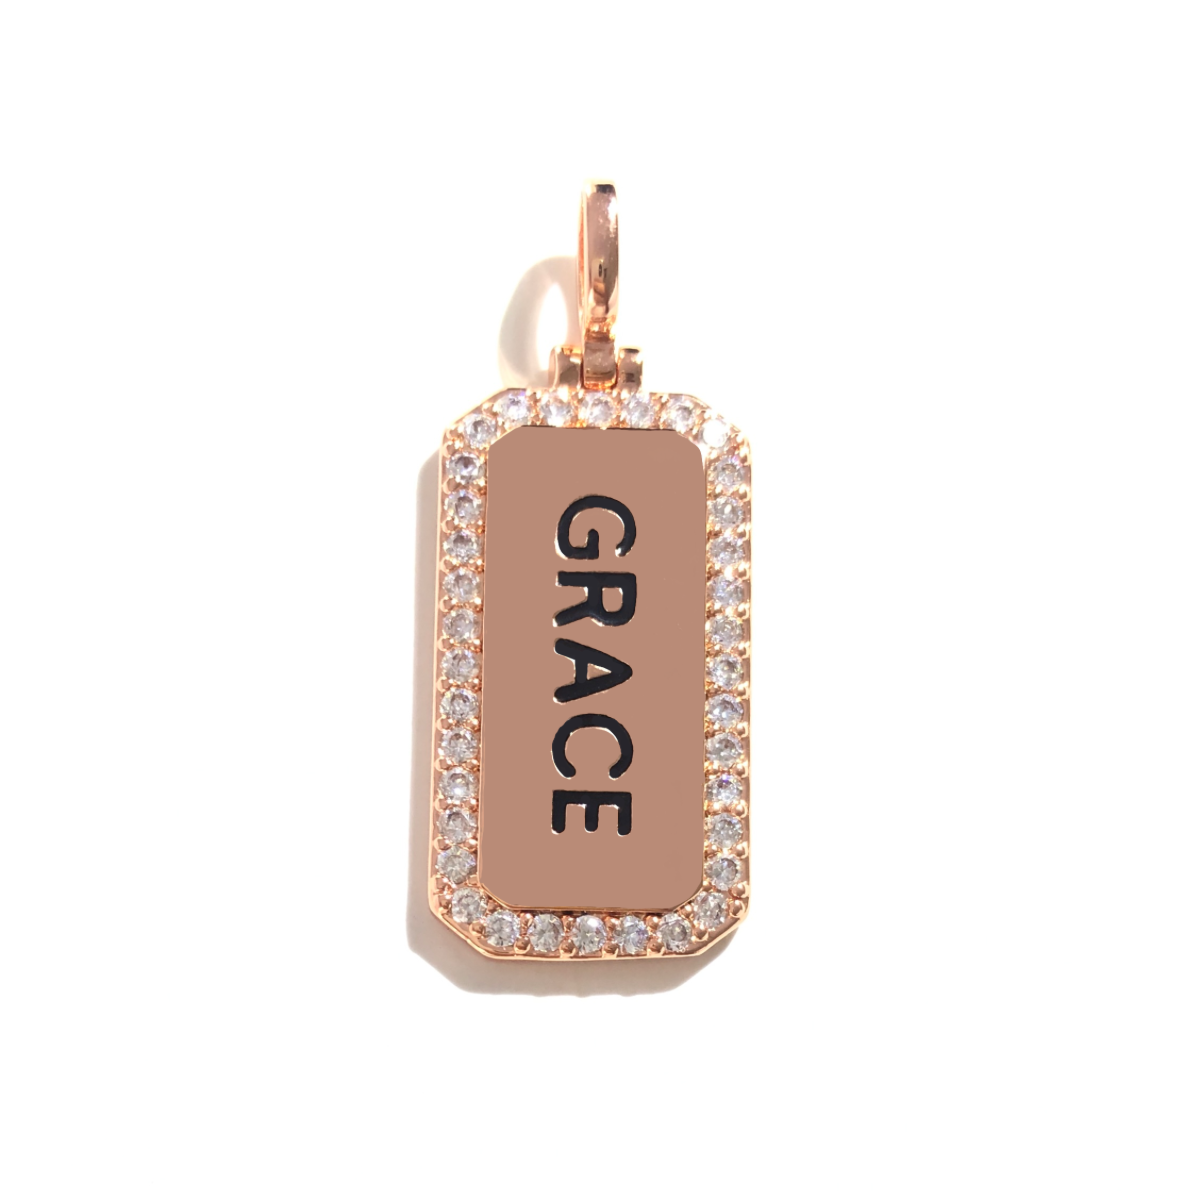 10pcs/lot 38*15mm CZ Paved Grace Word Tags Charms Pendants Rose Gold CZ Paved Charms Christian Quotes New Charms Arrivals Word Tags Charms Beads Beyond